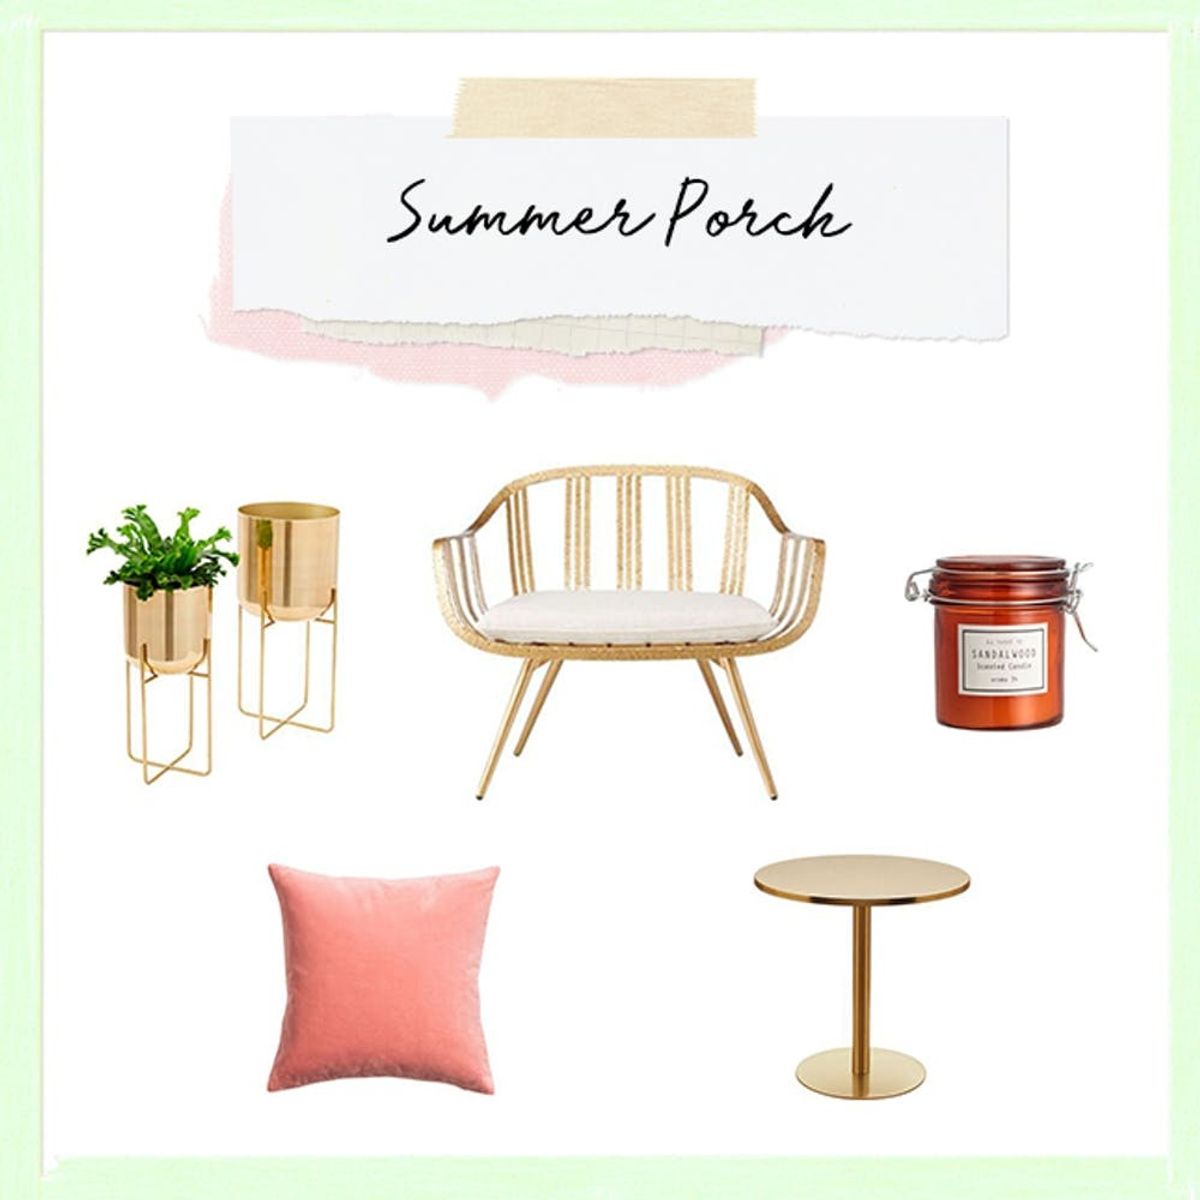 How to Decorate Your Porch for Summertime Lounging